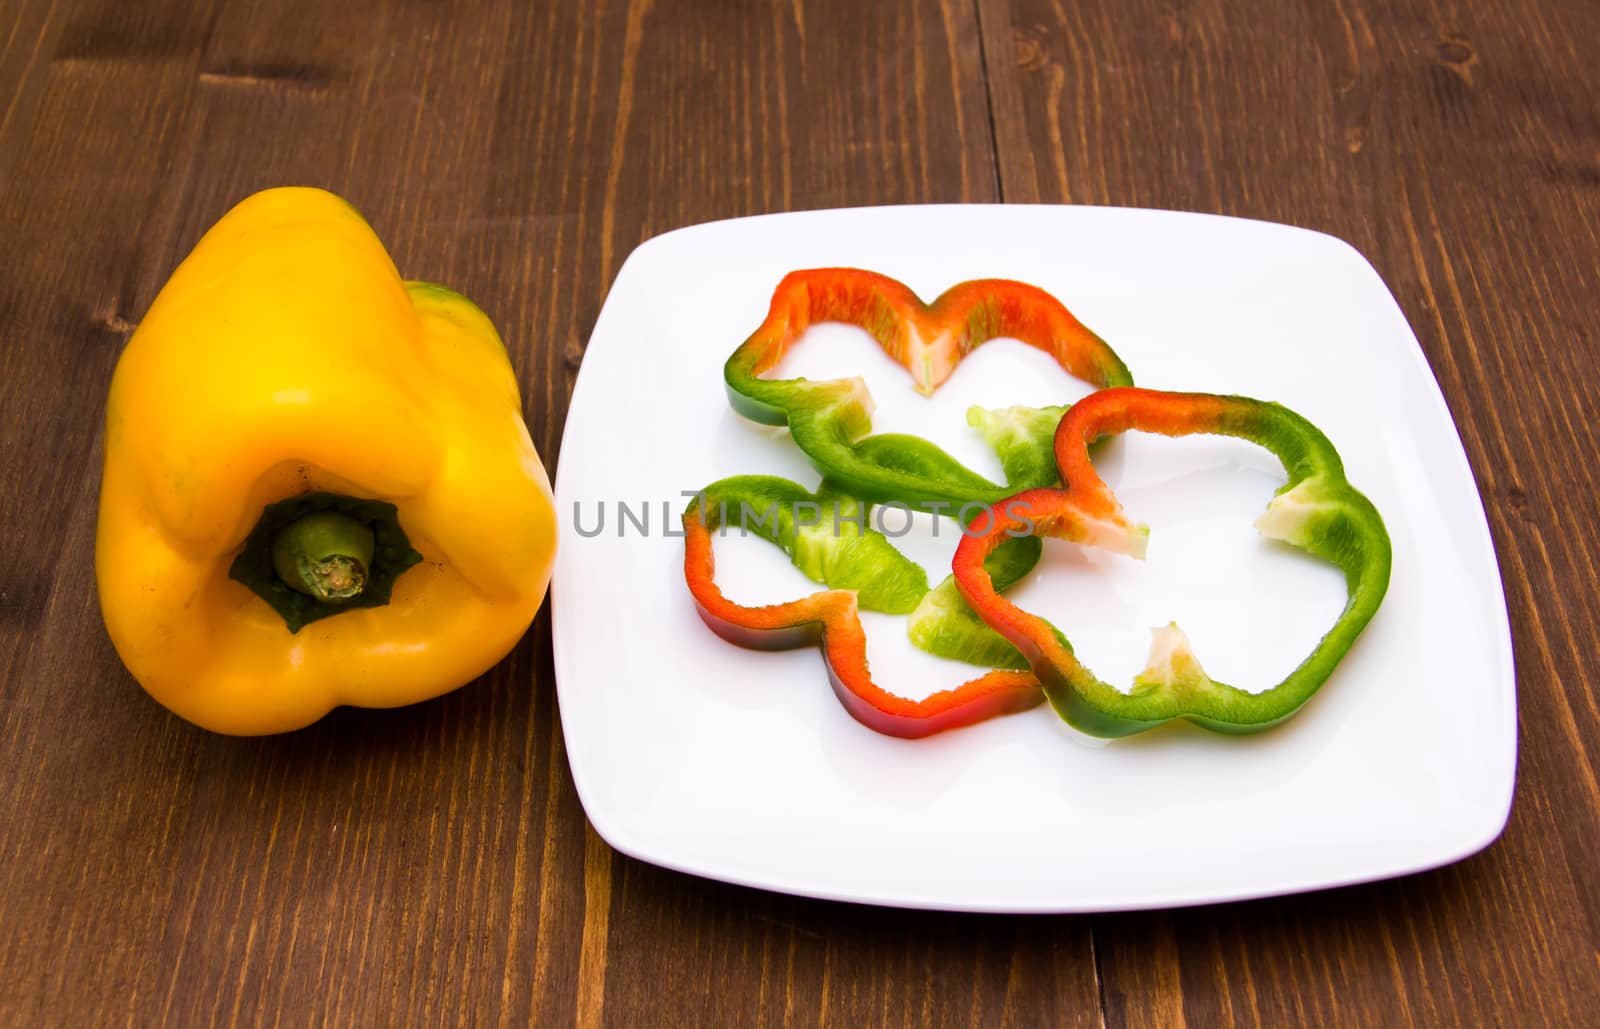 Pepper slices on plate on wooden table